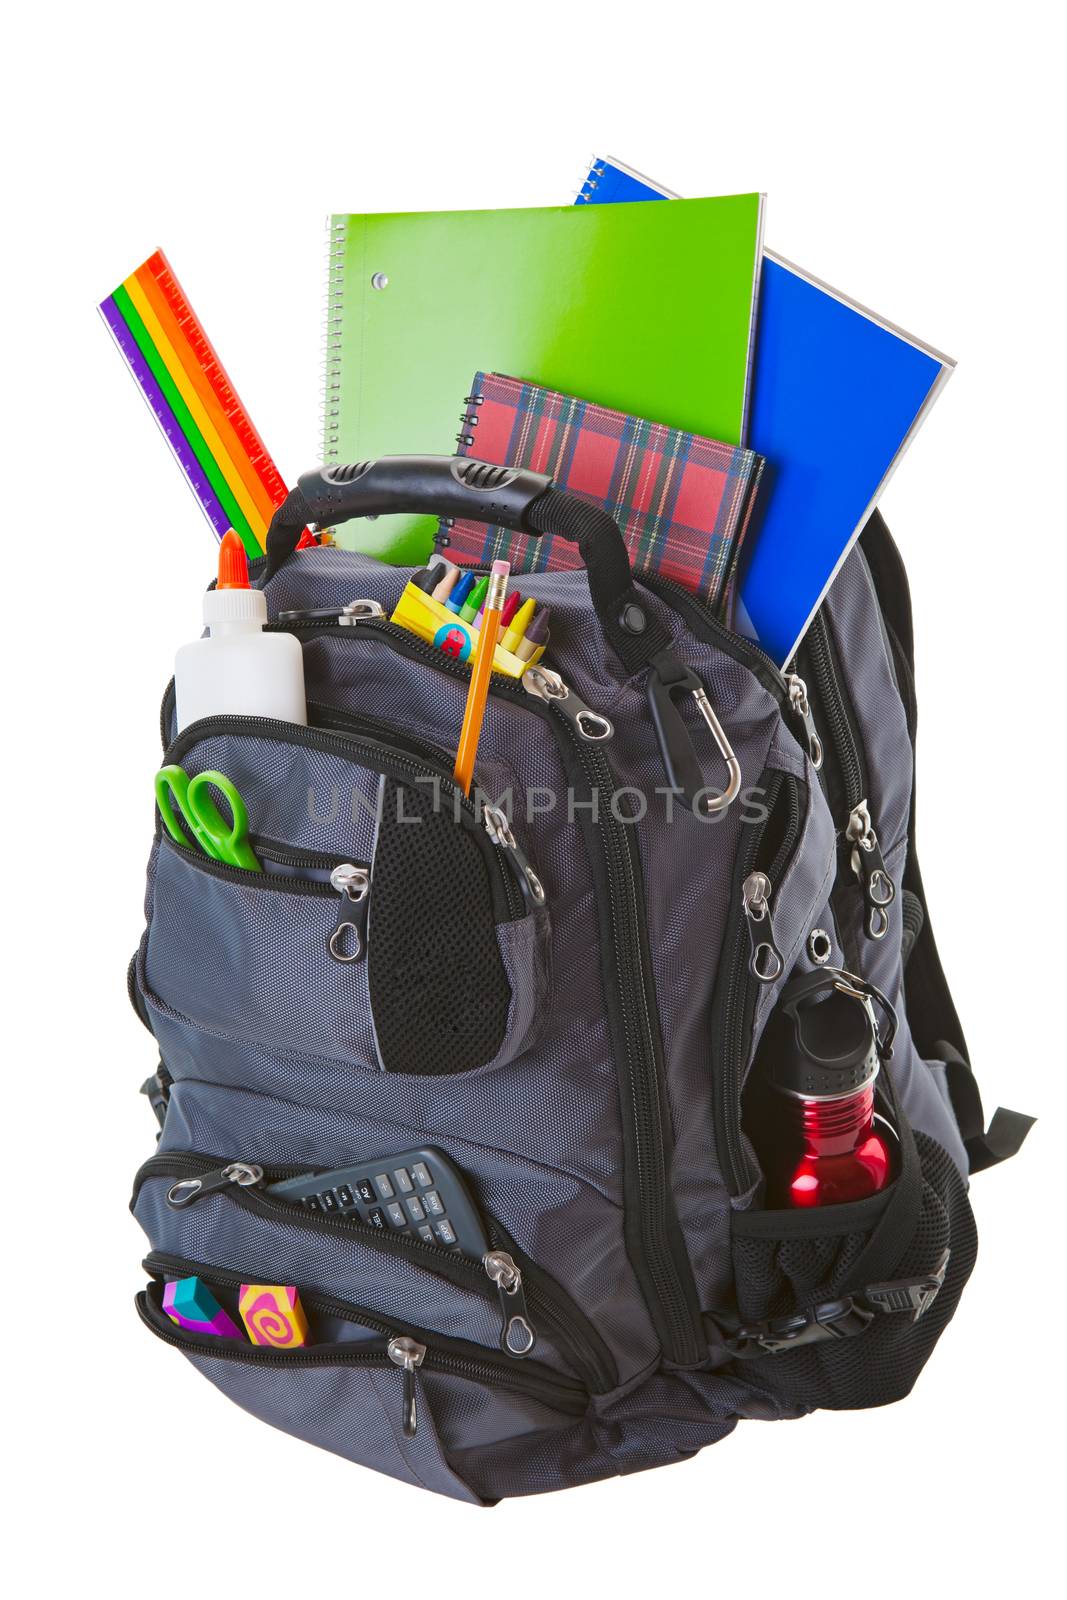 Backpack With School Supplies by songbird839